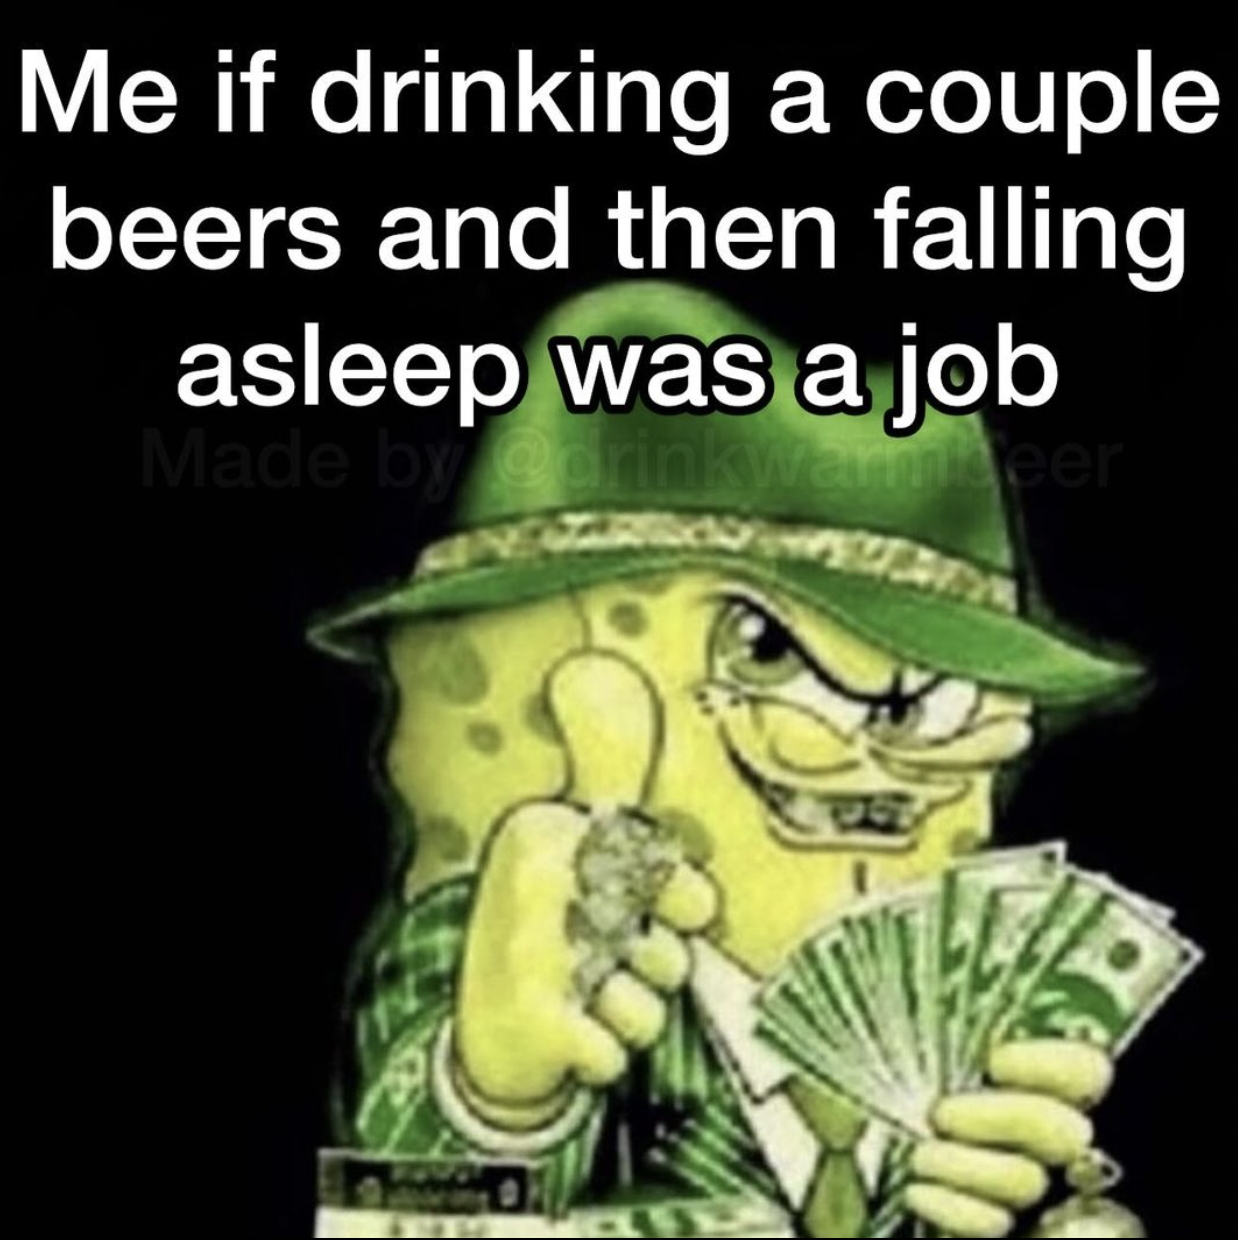 gangster paradise spongebob - Me if drinking a couple beers and then falling asleep was a job Made by meer